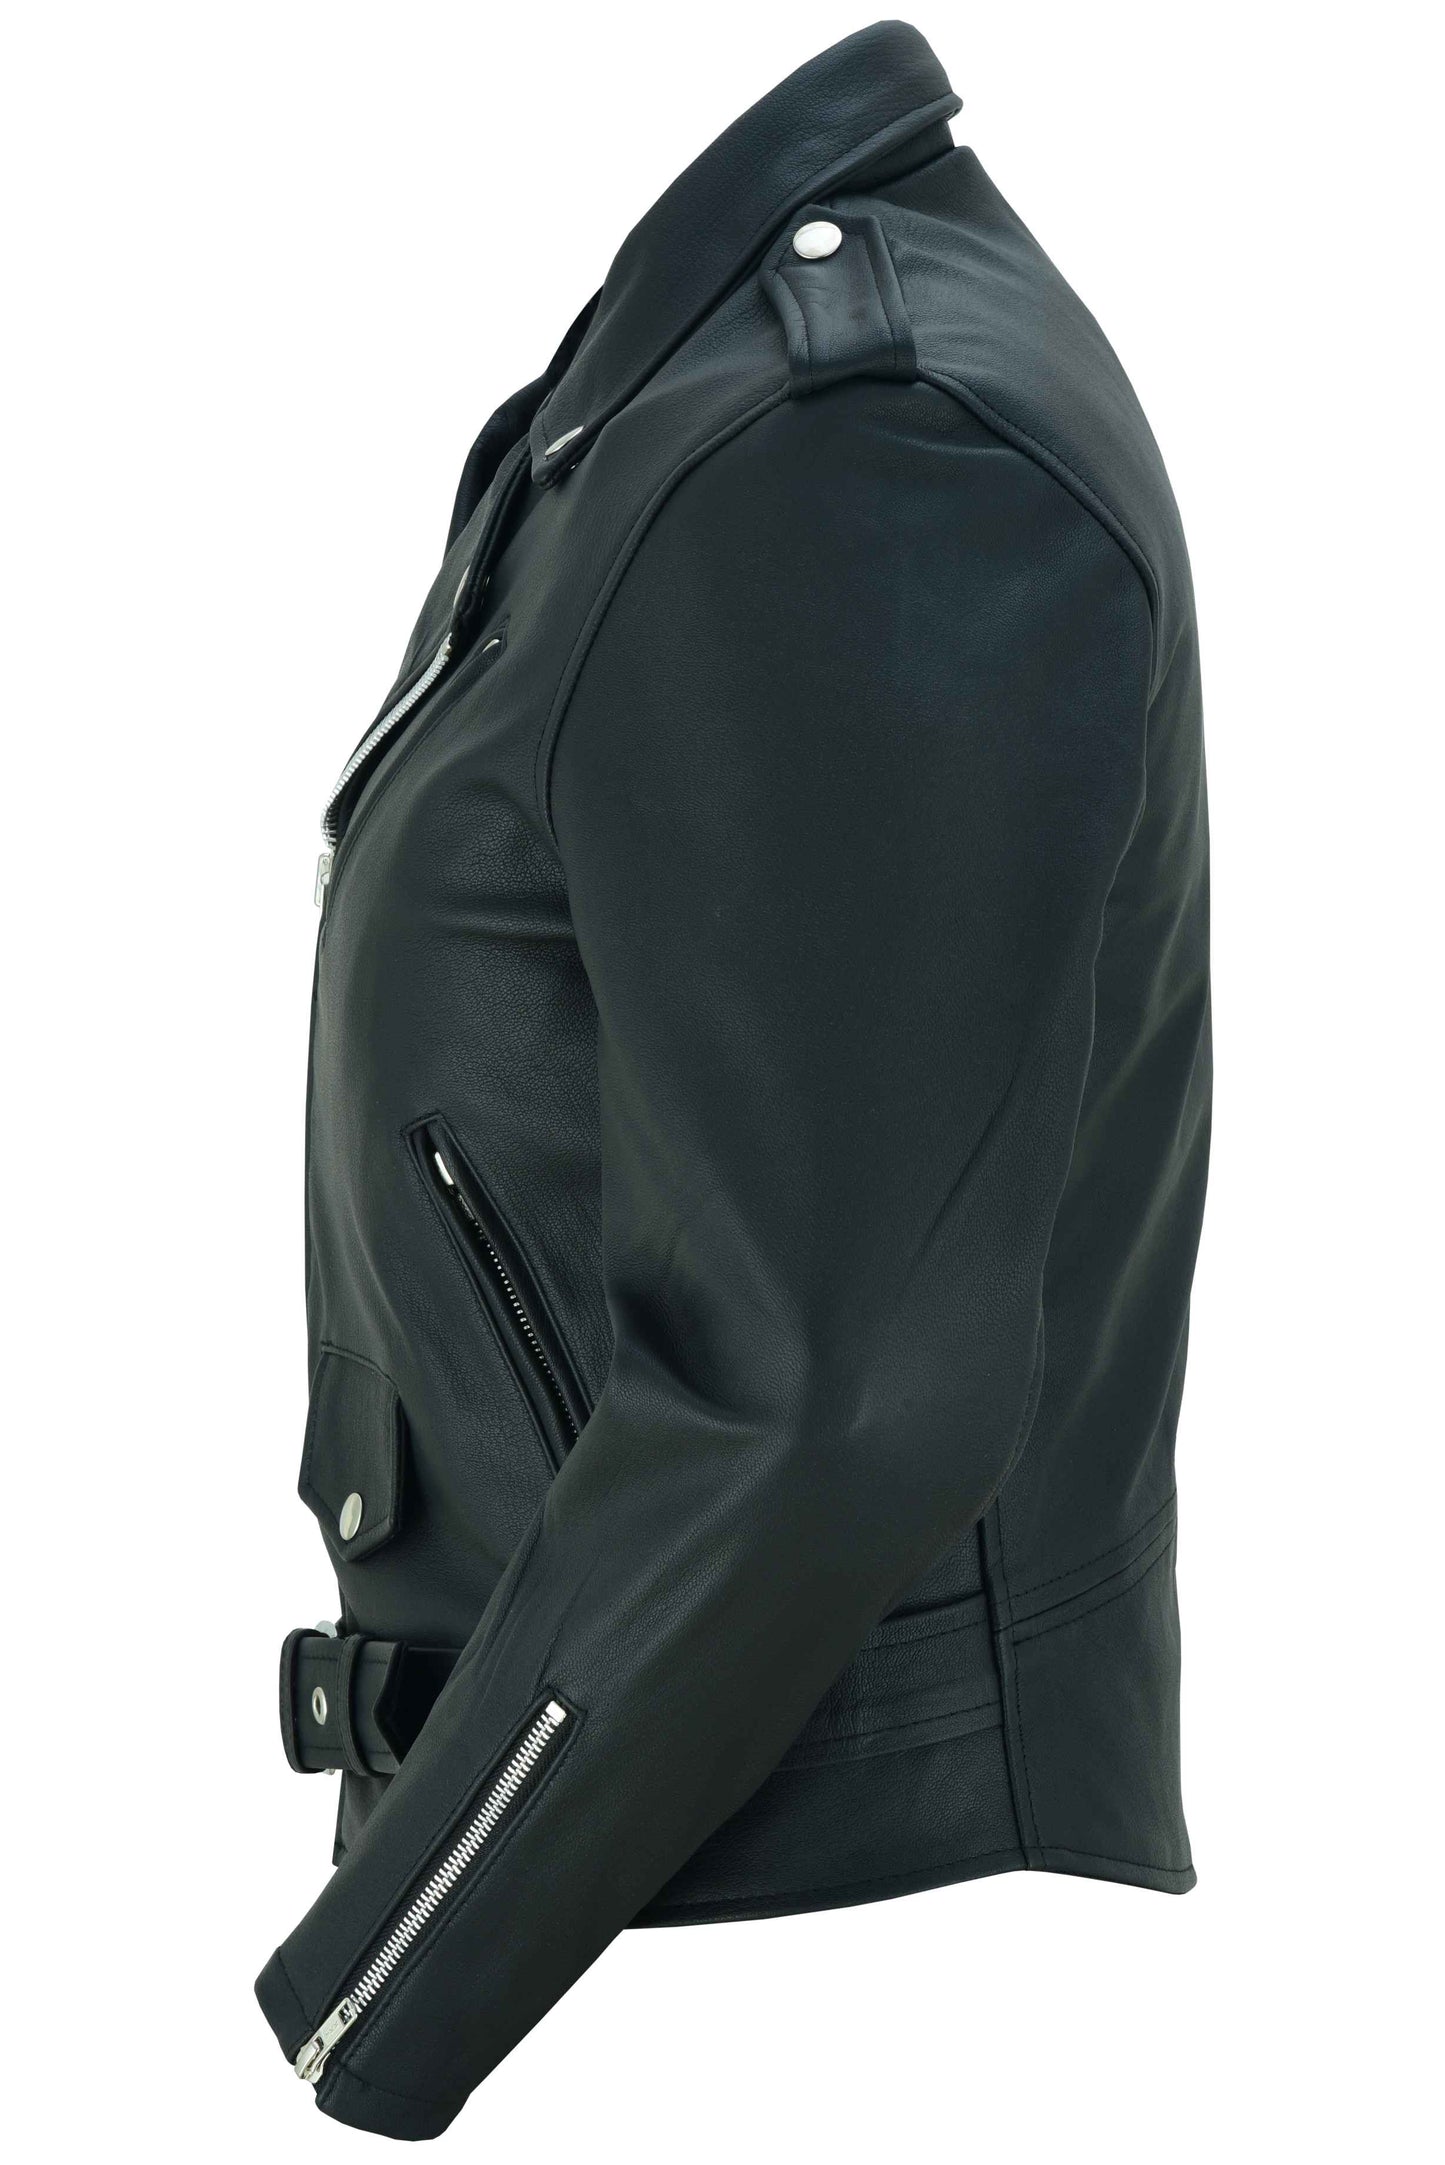 RC850 Women's Classic Lightweight Police Style M/C Jacket